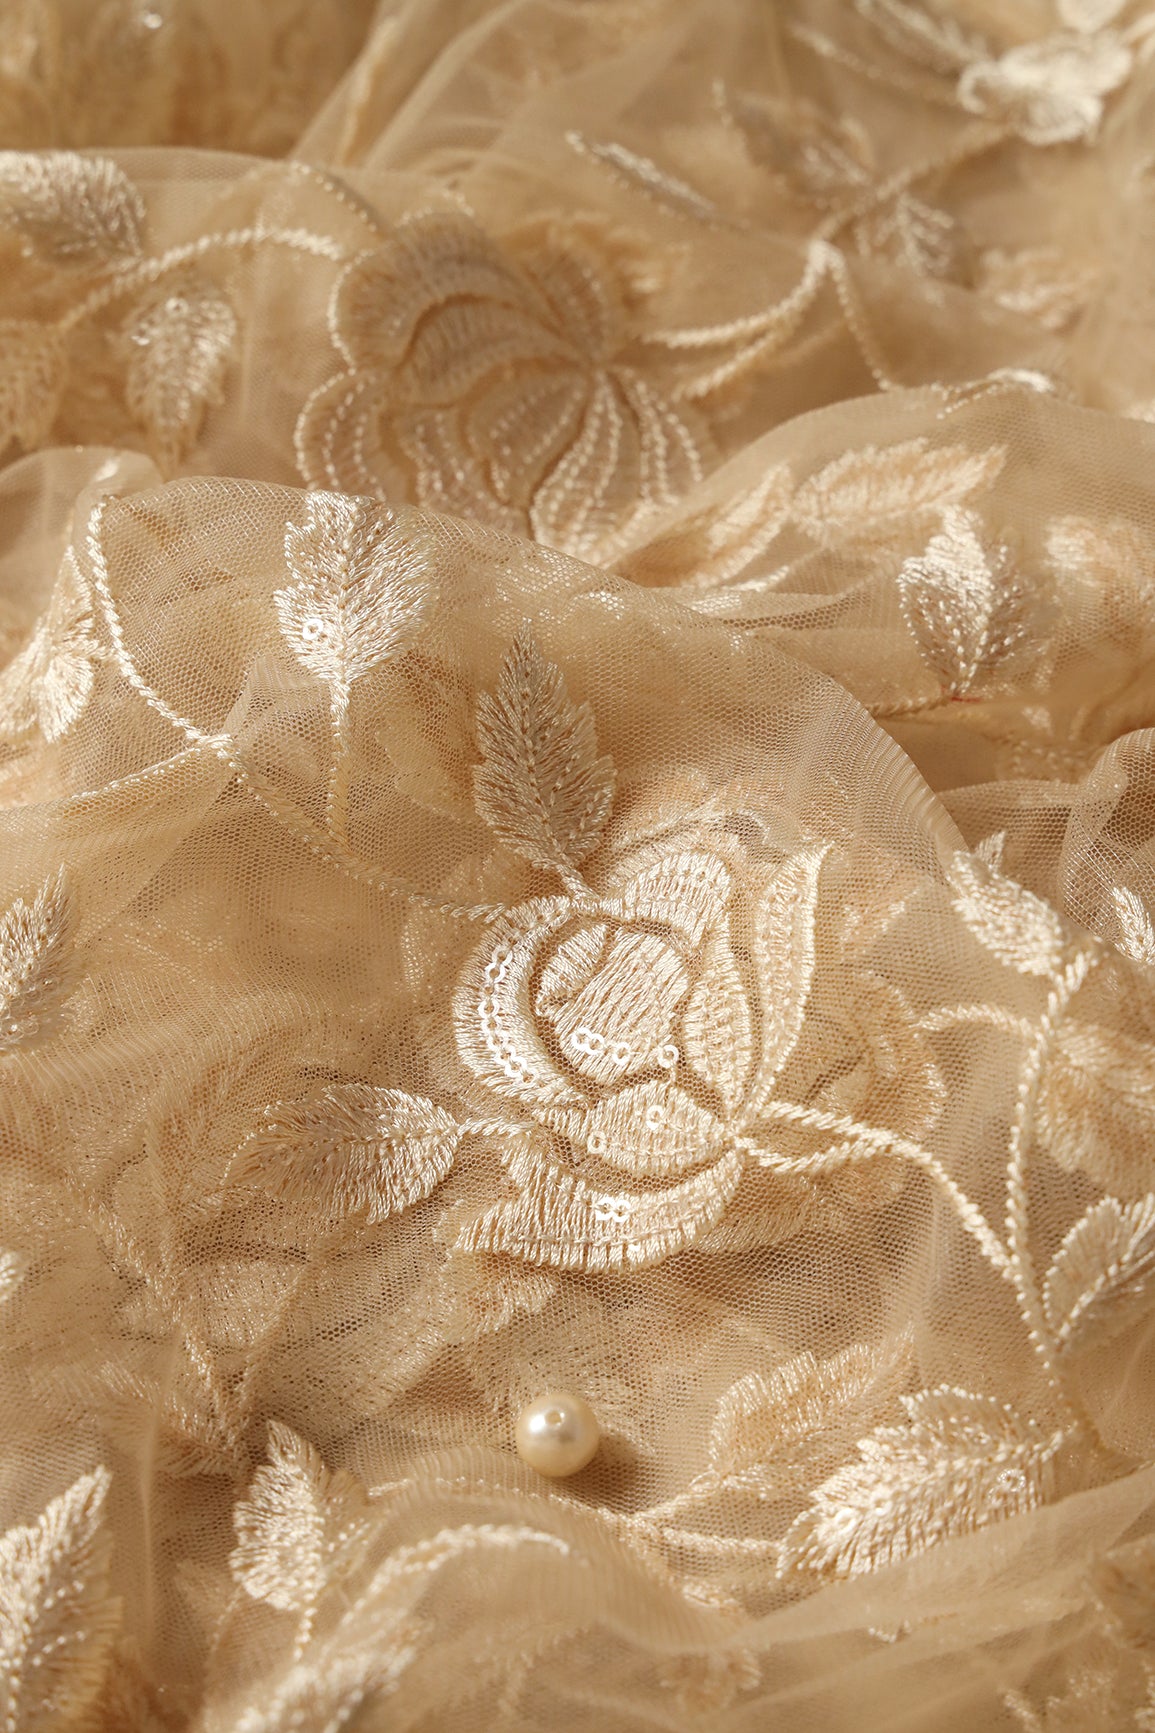 Gorgeous Beige Thread With Sequins Floral Leafy Embroidery On Beige Soft Net Fabric